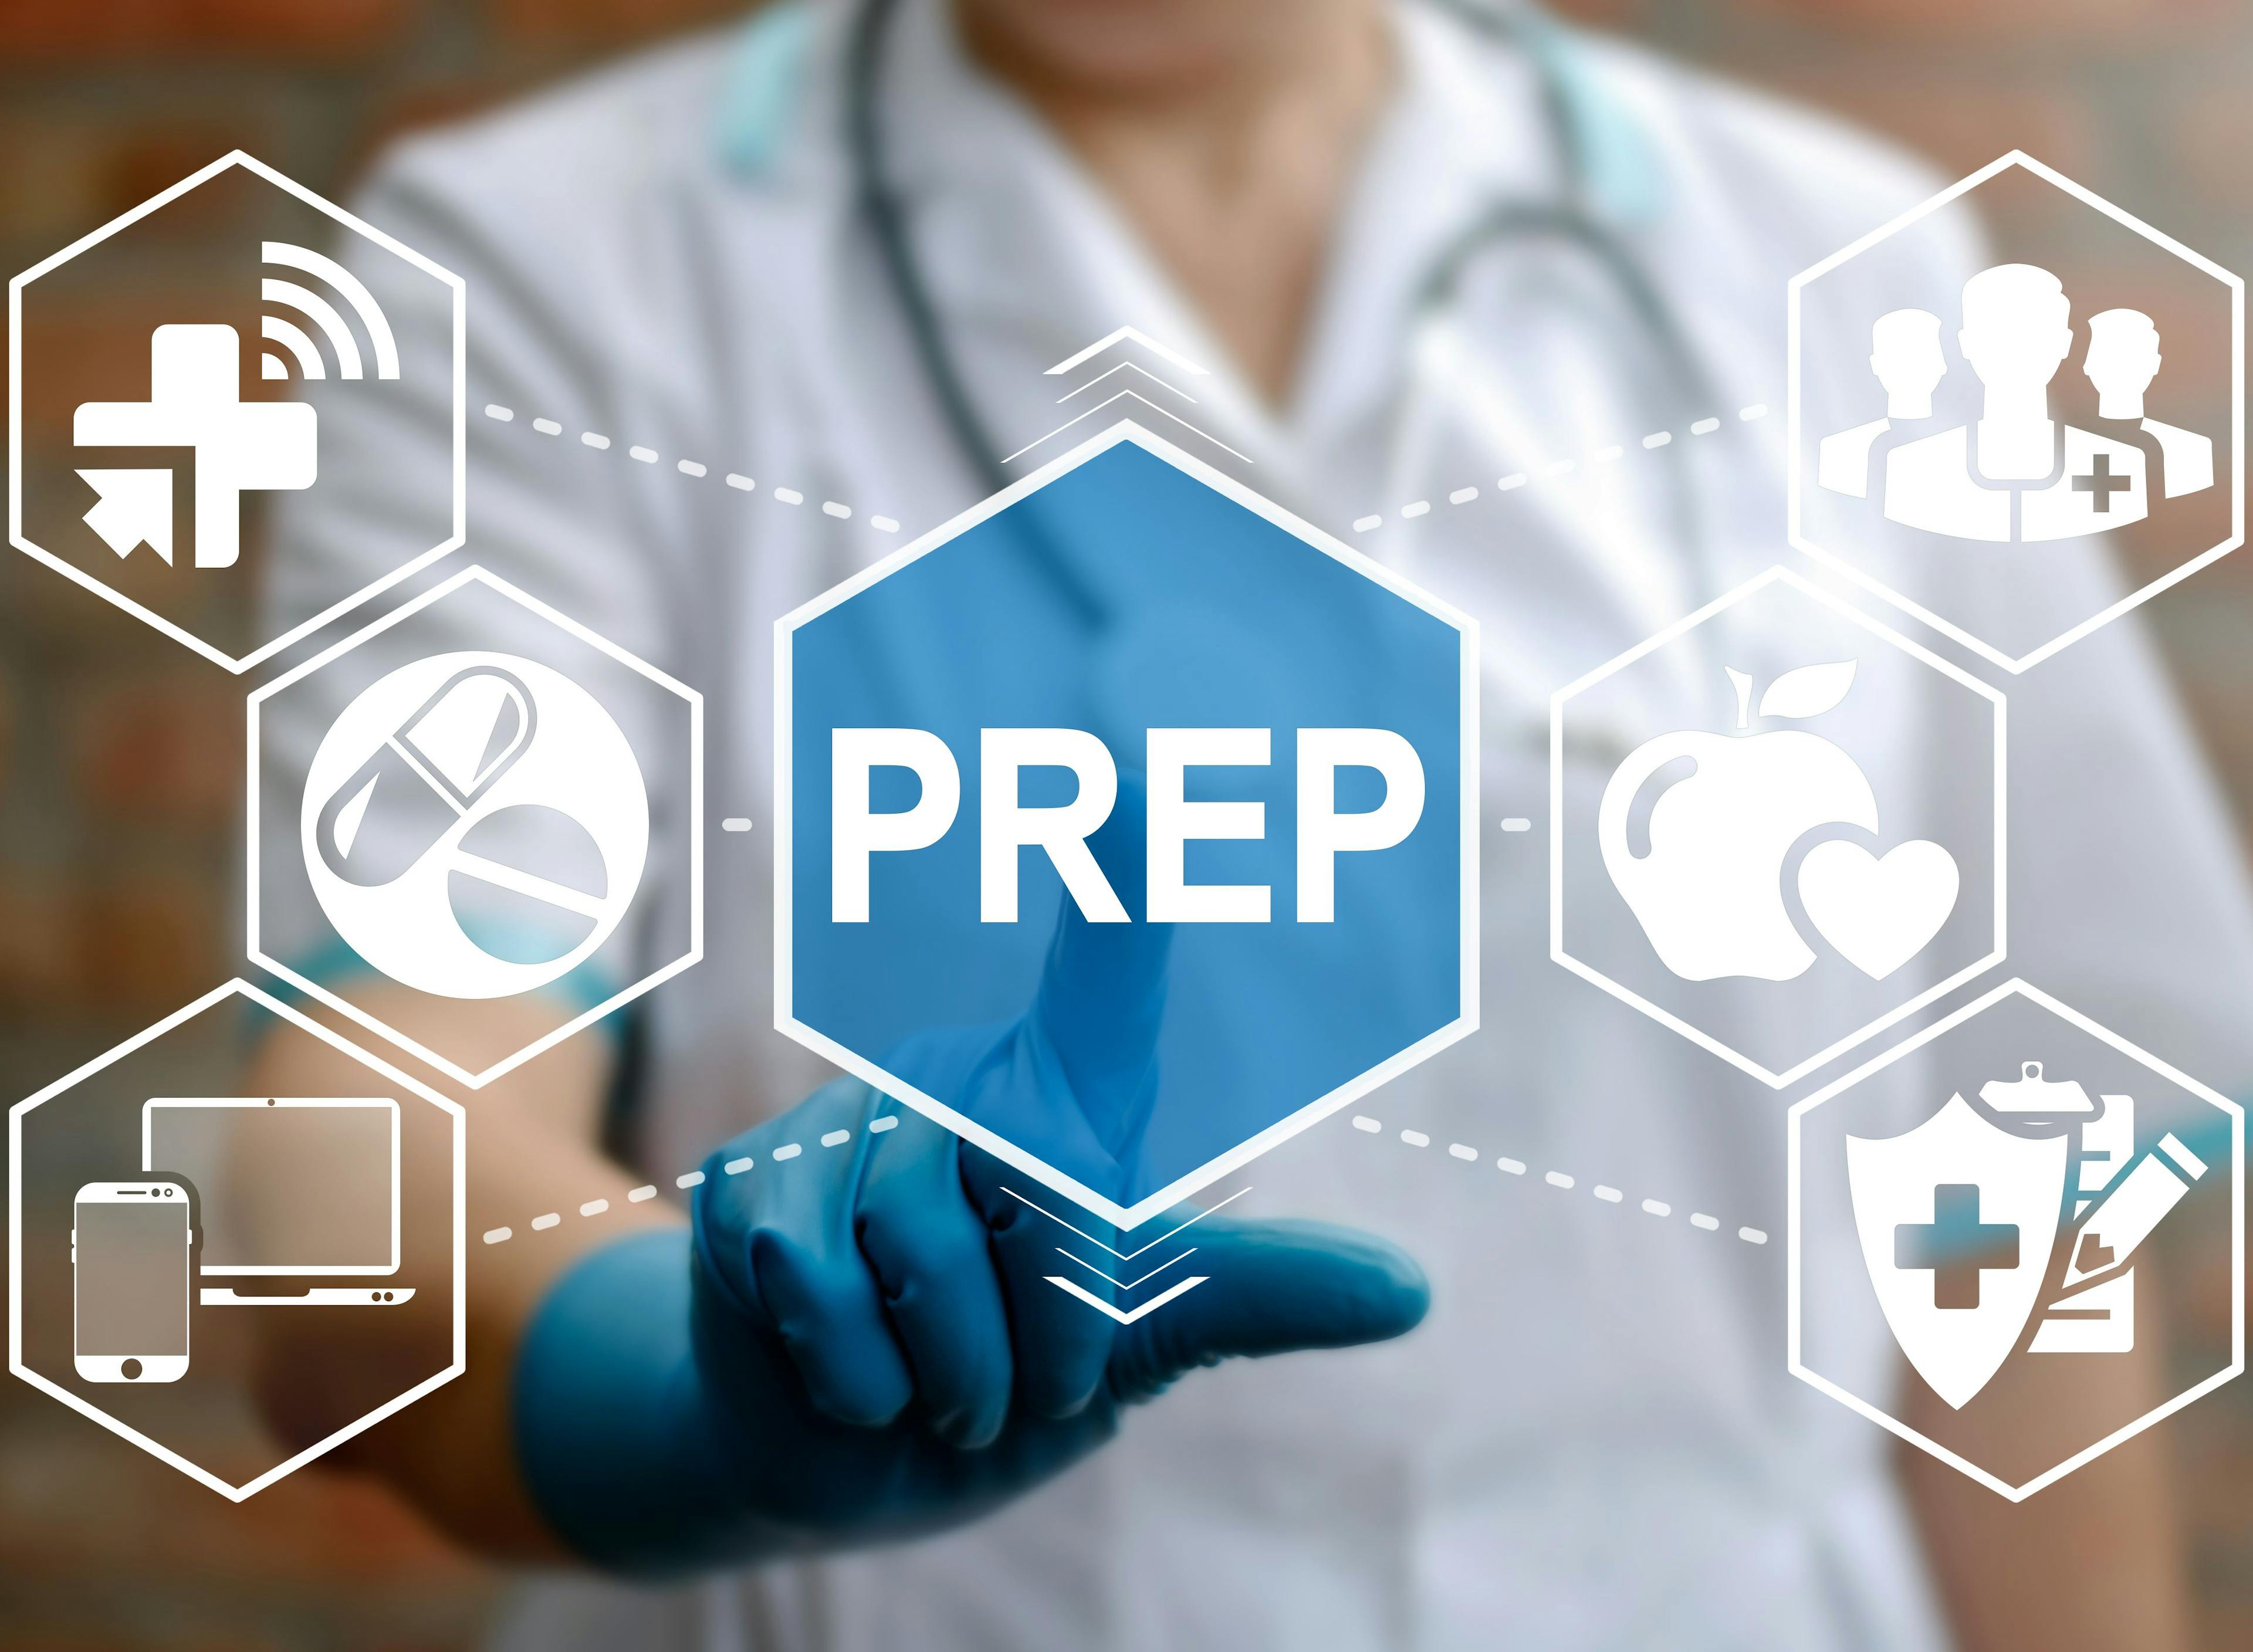 How Stigma, Unconscious Bias Impacts Health Outcomes for Patients Seeking, Using PrEP for HIV Prevention